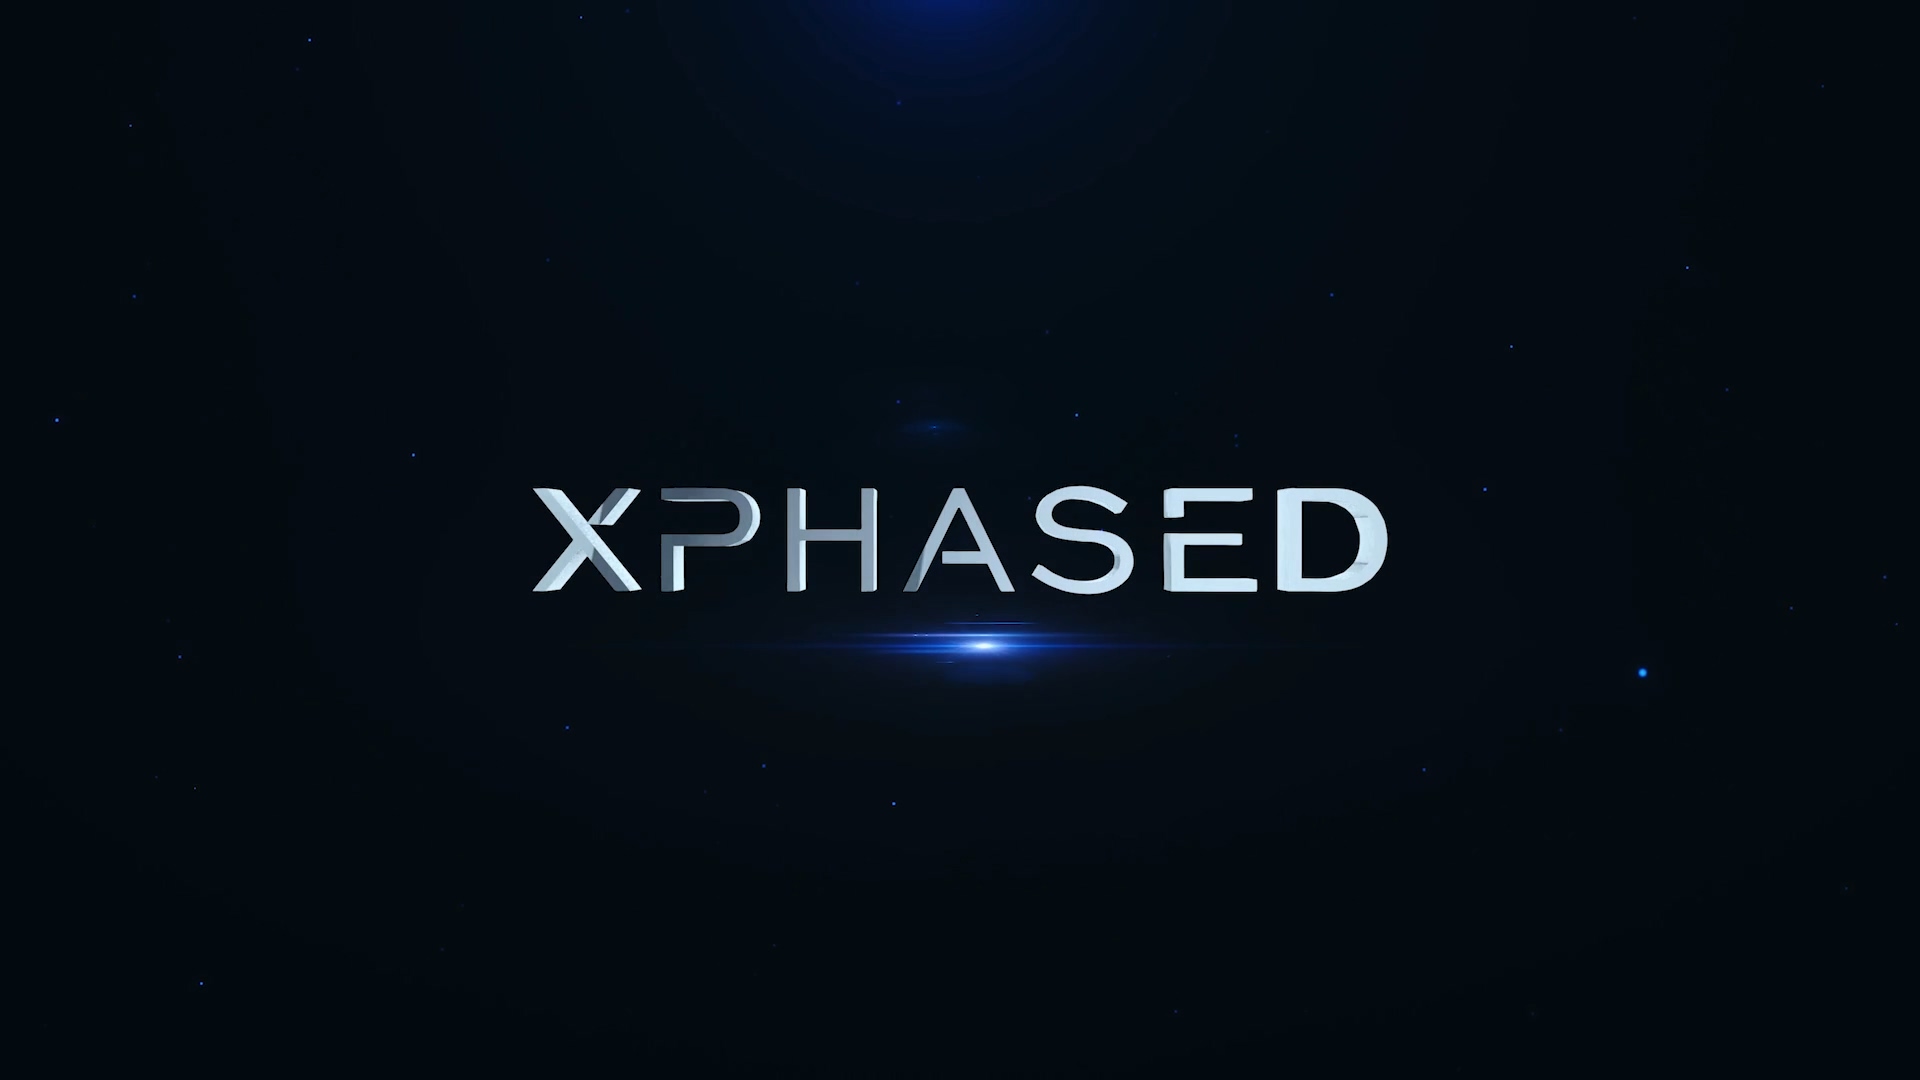 XPHASED Phased array product series